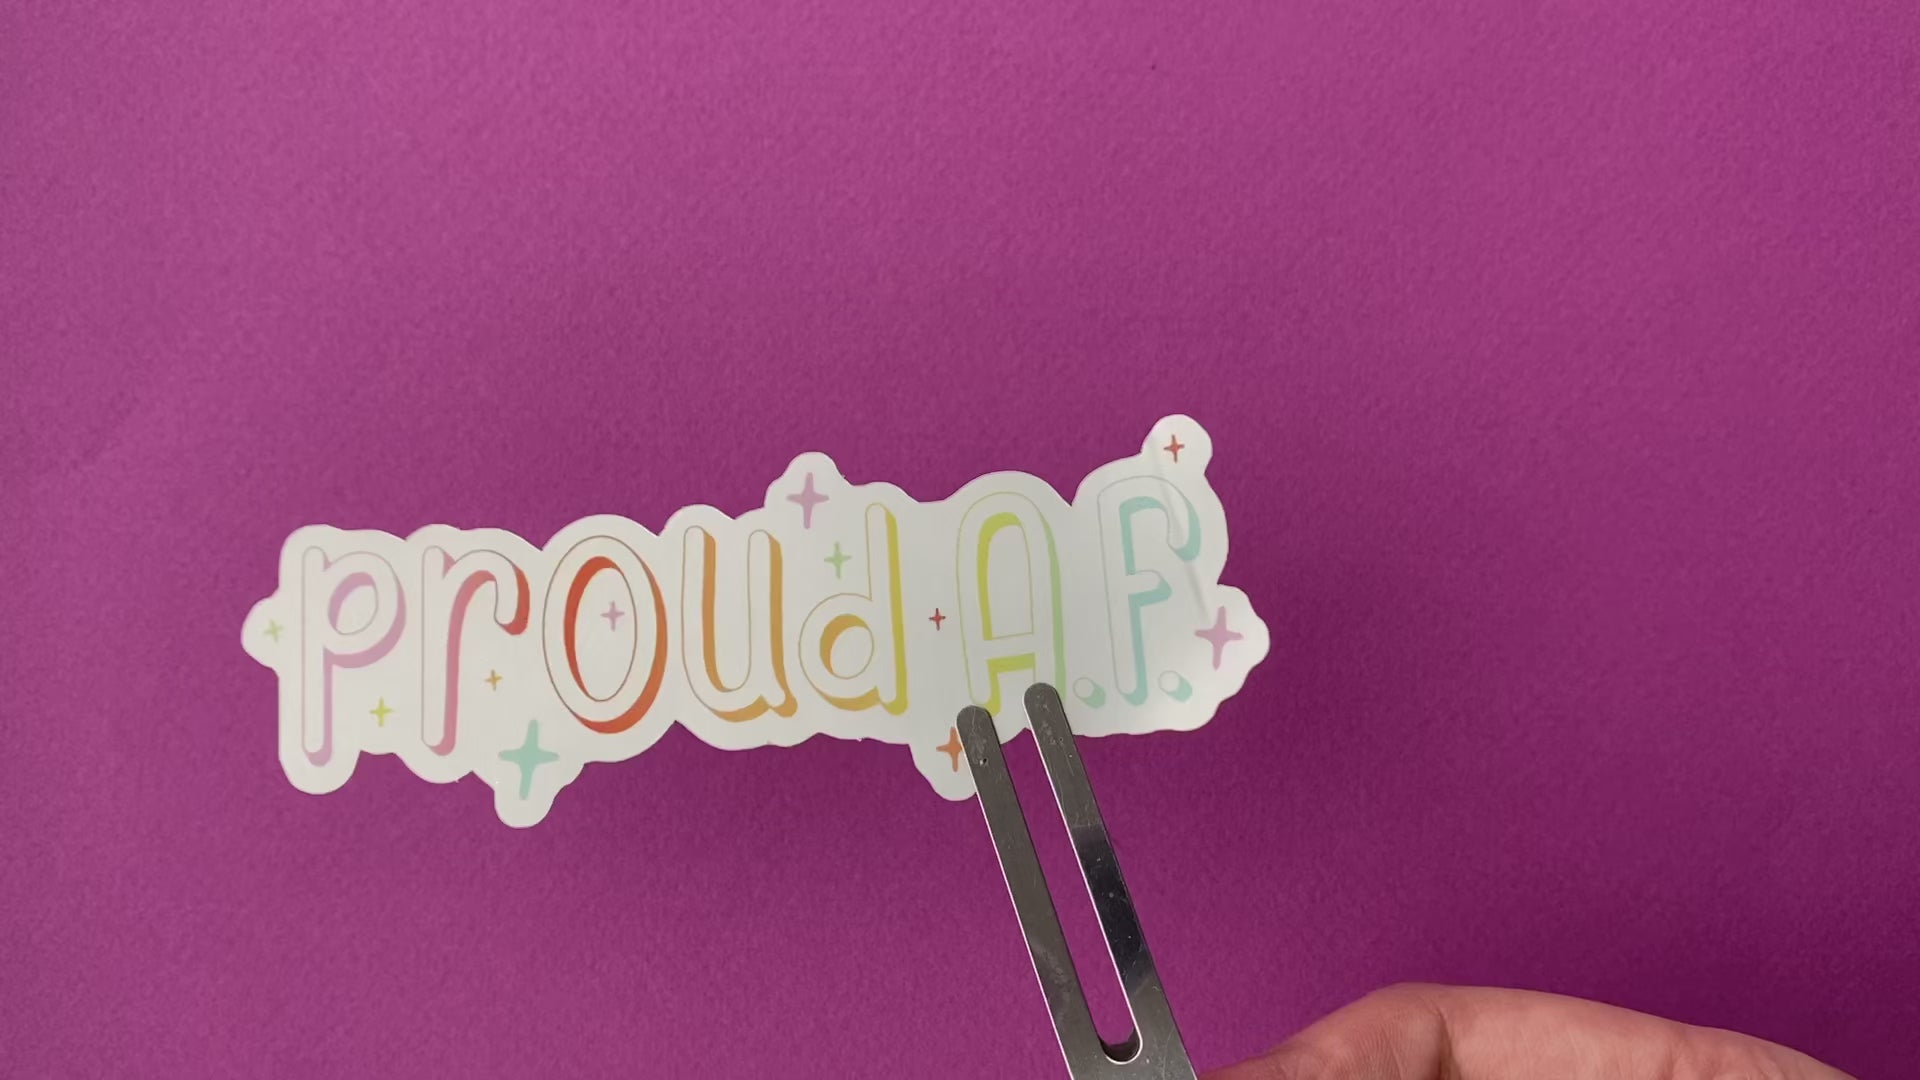 A clip holds a metallic silver sticker against a bright purple paper background. The sticker says "proud A.F." in a pastel rainbow gradient and is surrounded by sparkles. As the sticker rotates, the metallic surface reflects lightly at different angles.